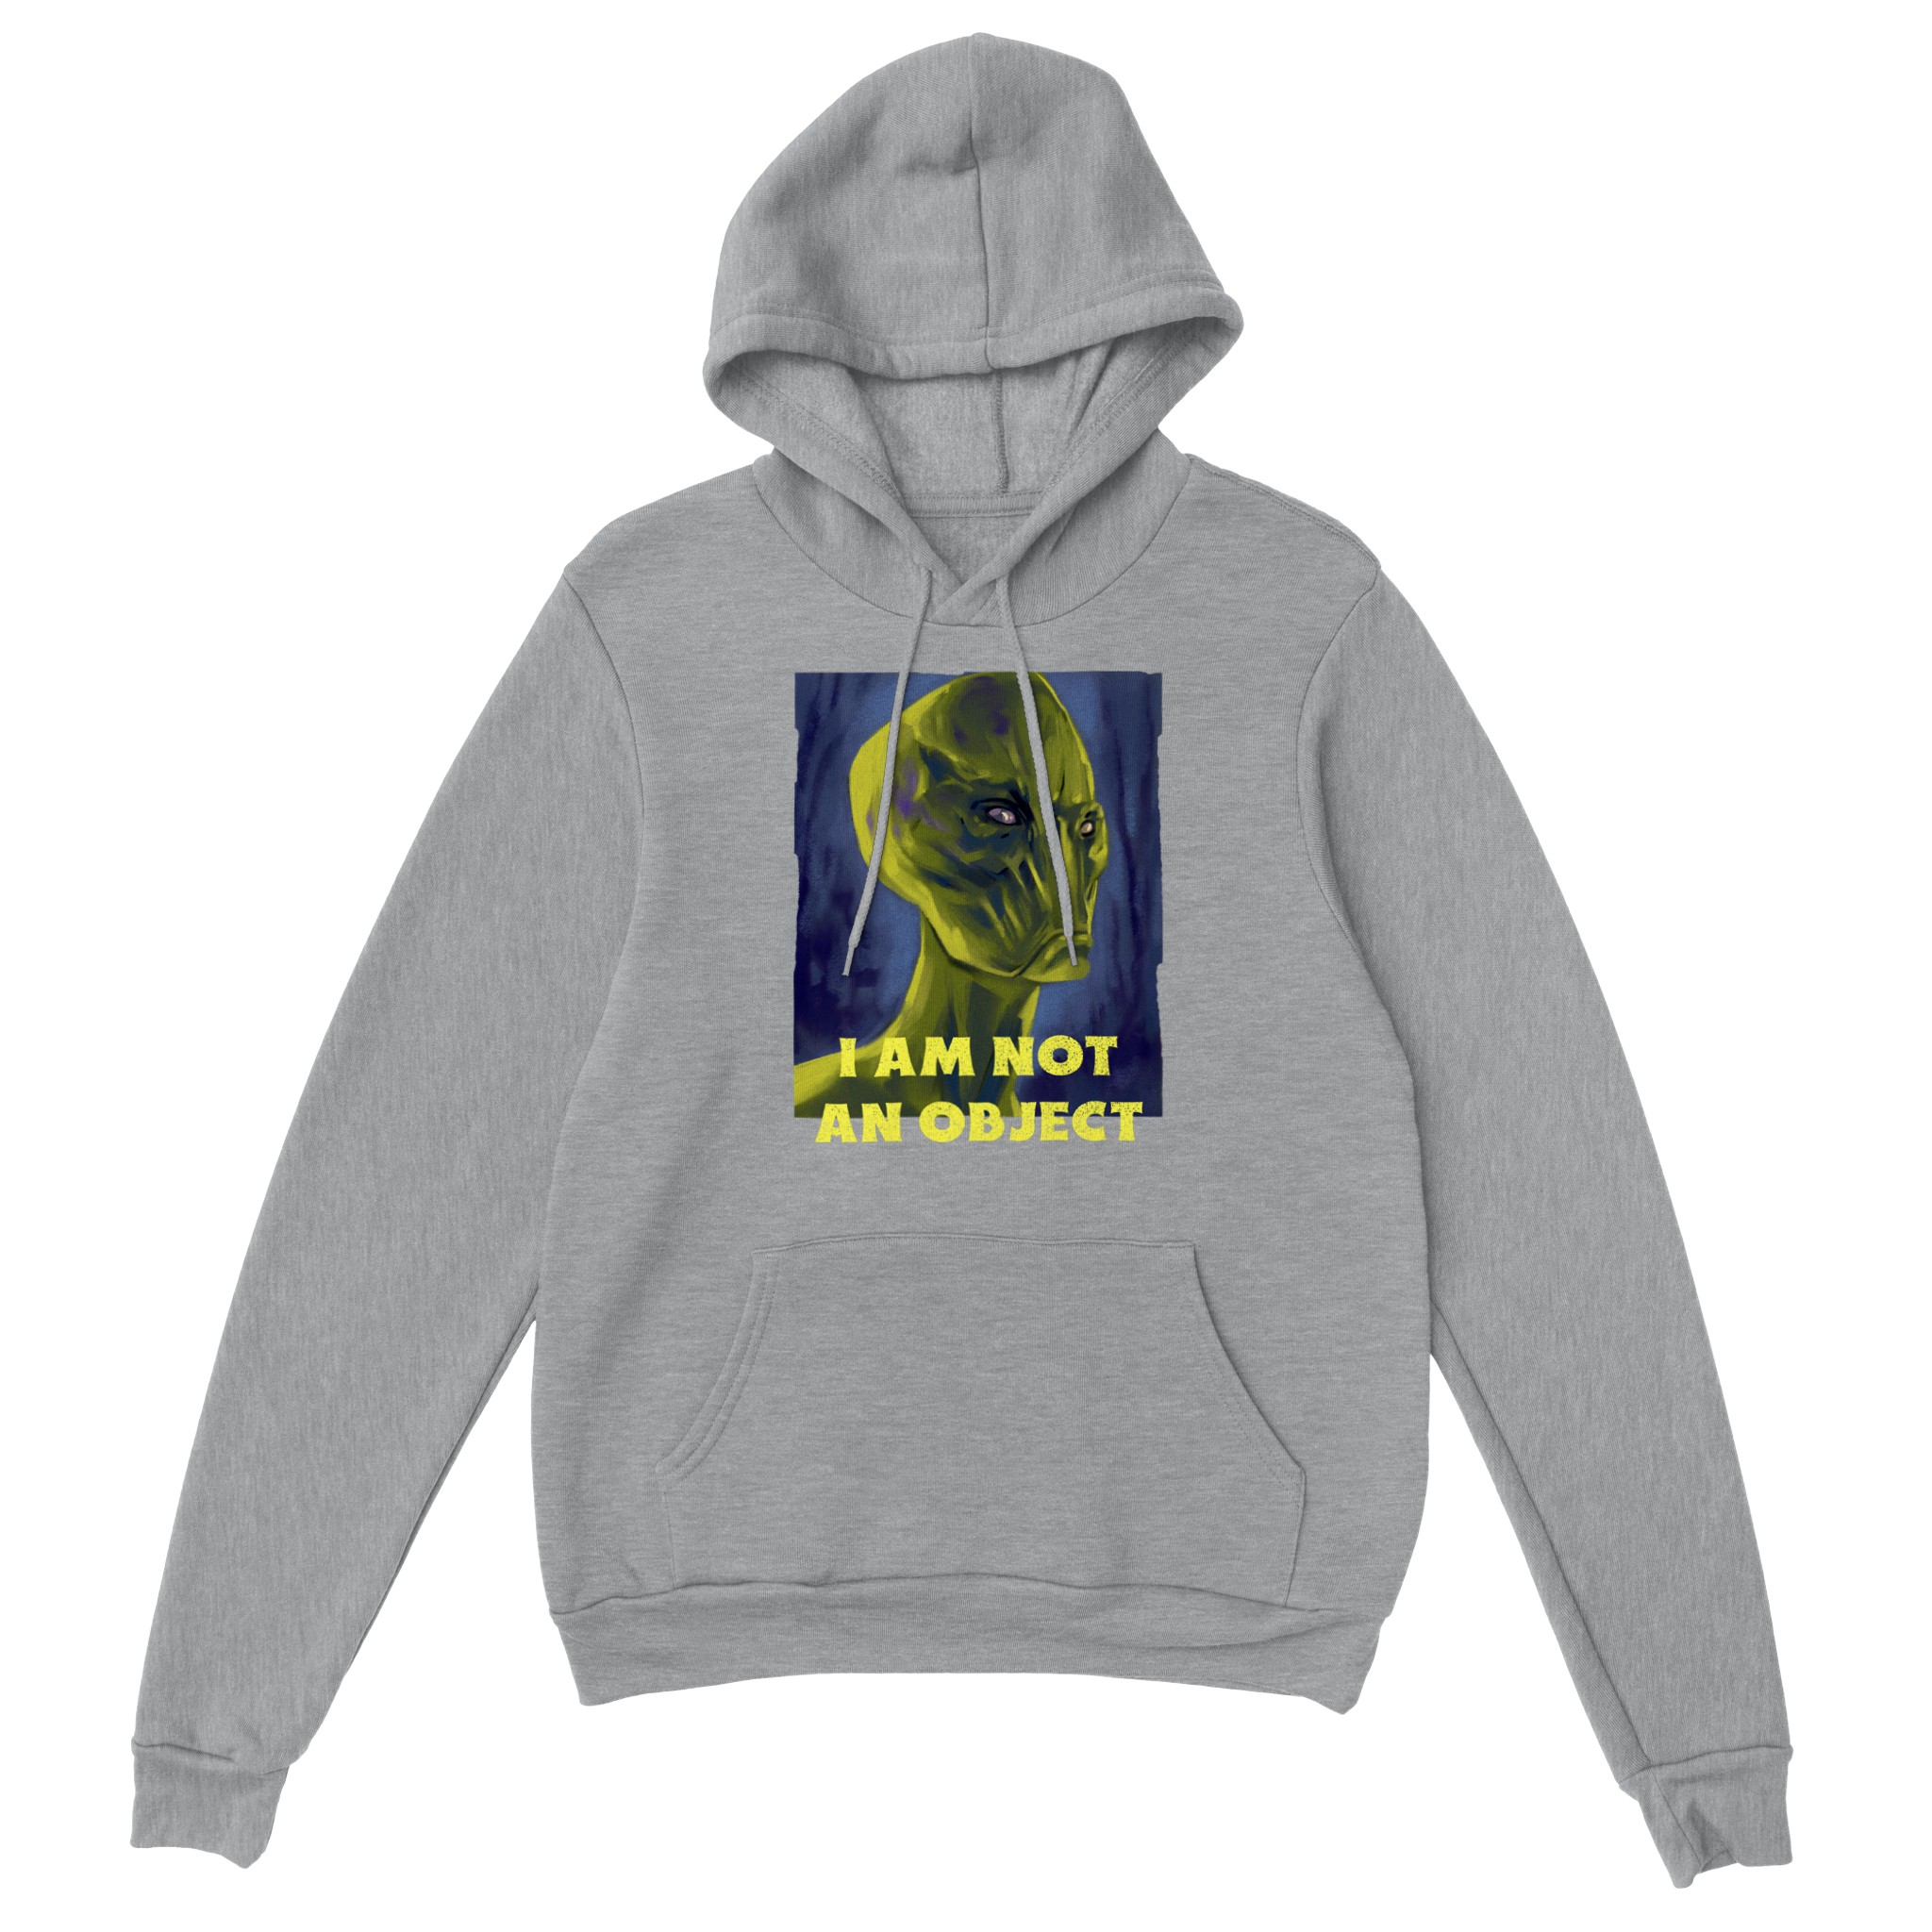 Not an object hoodie text with alien head image